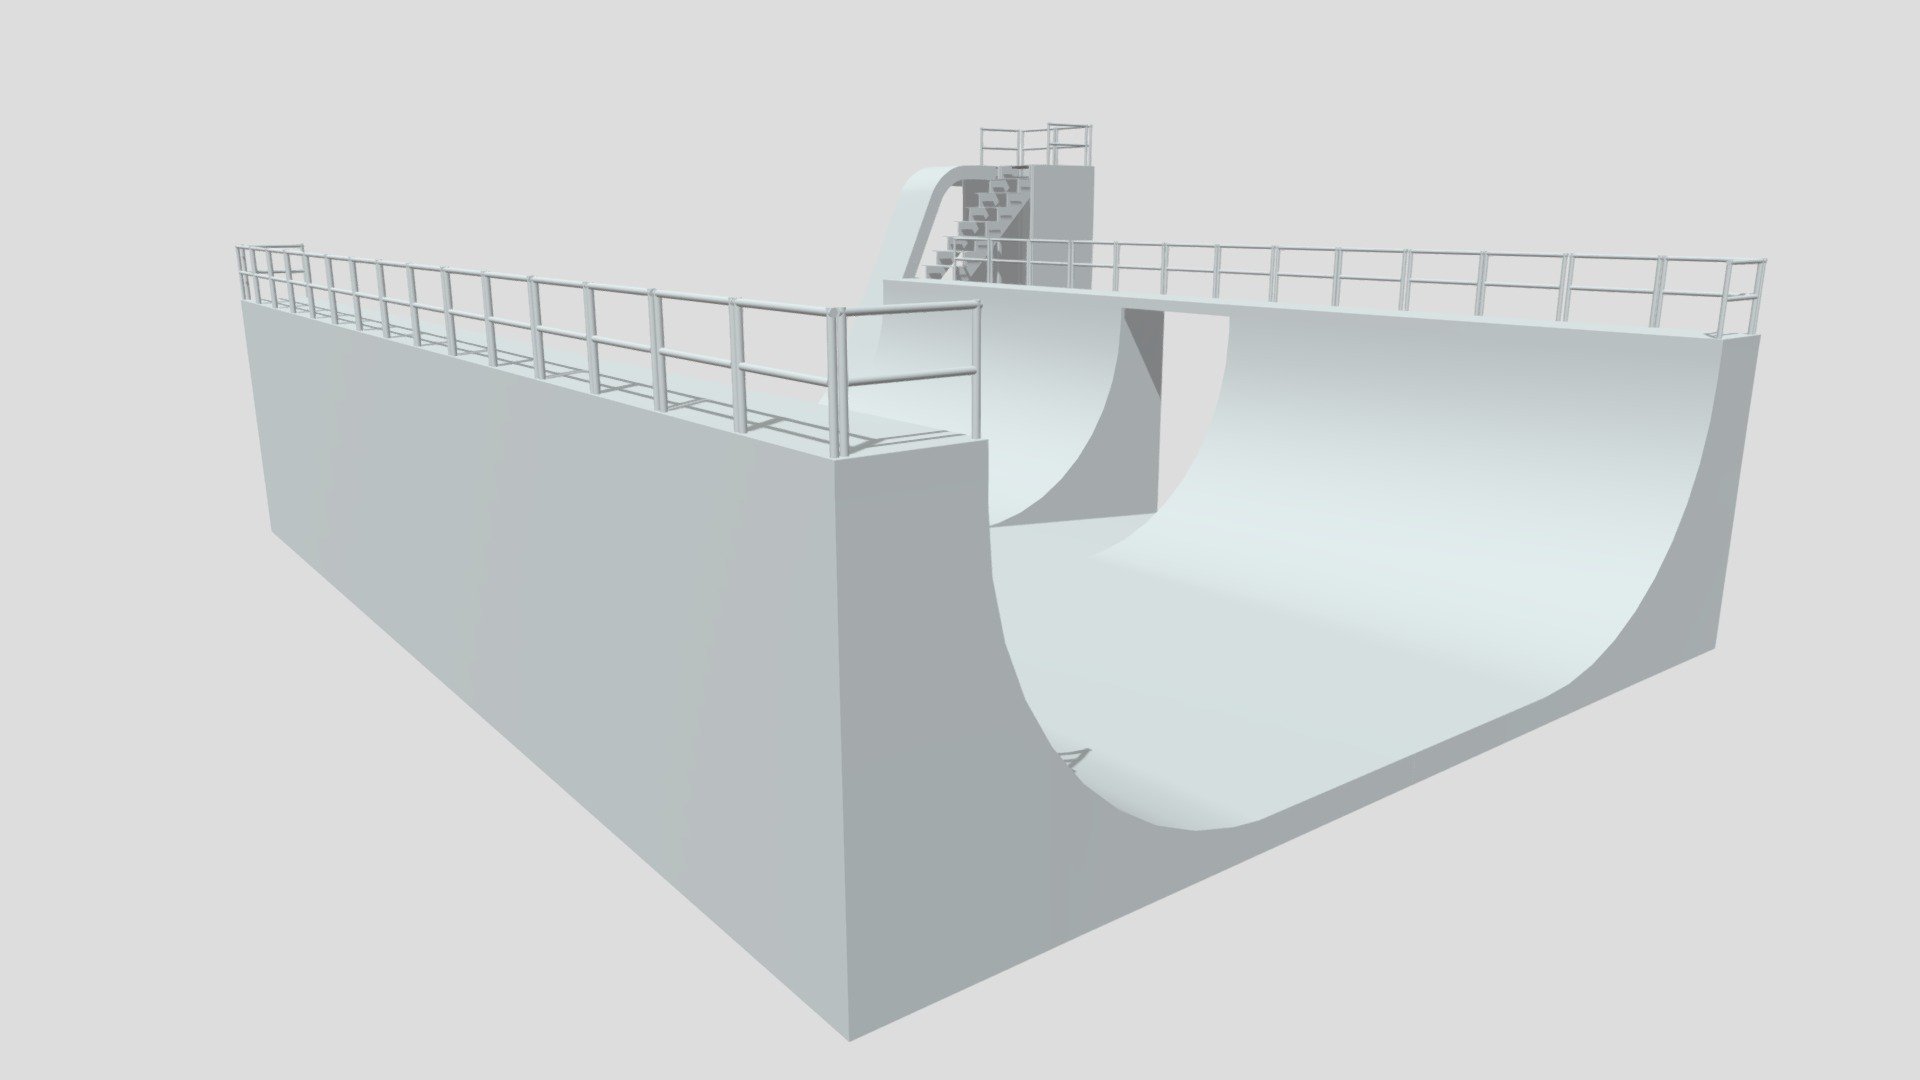 This is a the Skateboard Ramp I had to model for my class DIG 4780C, this is Assignment #3 3d model